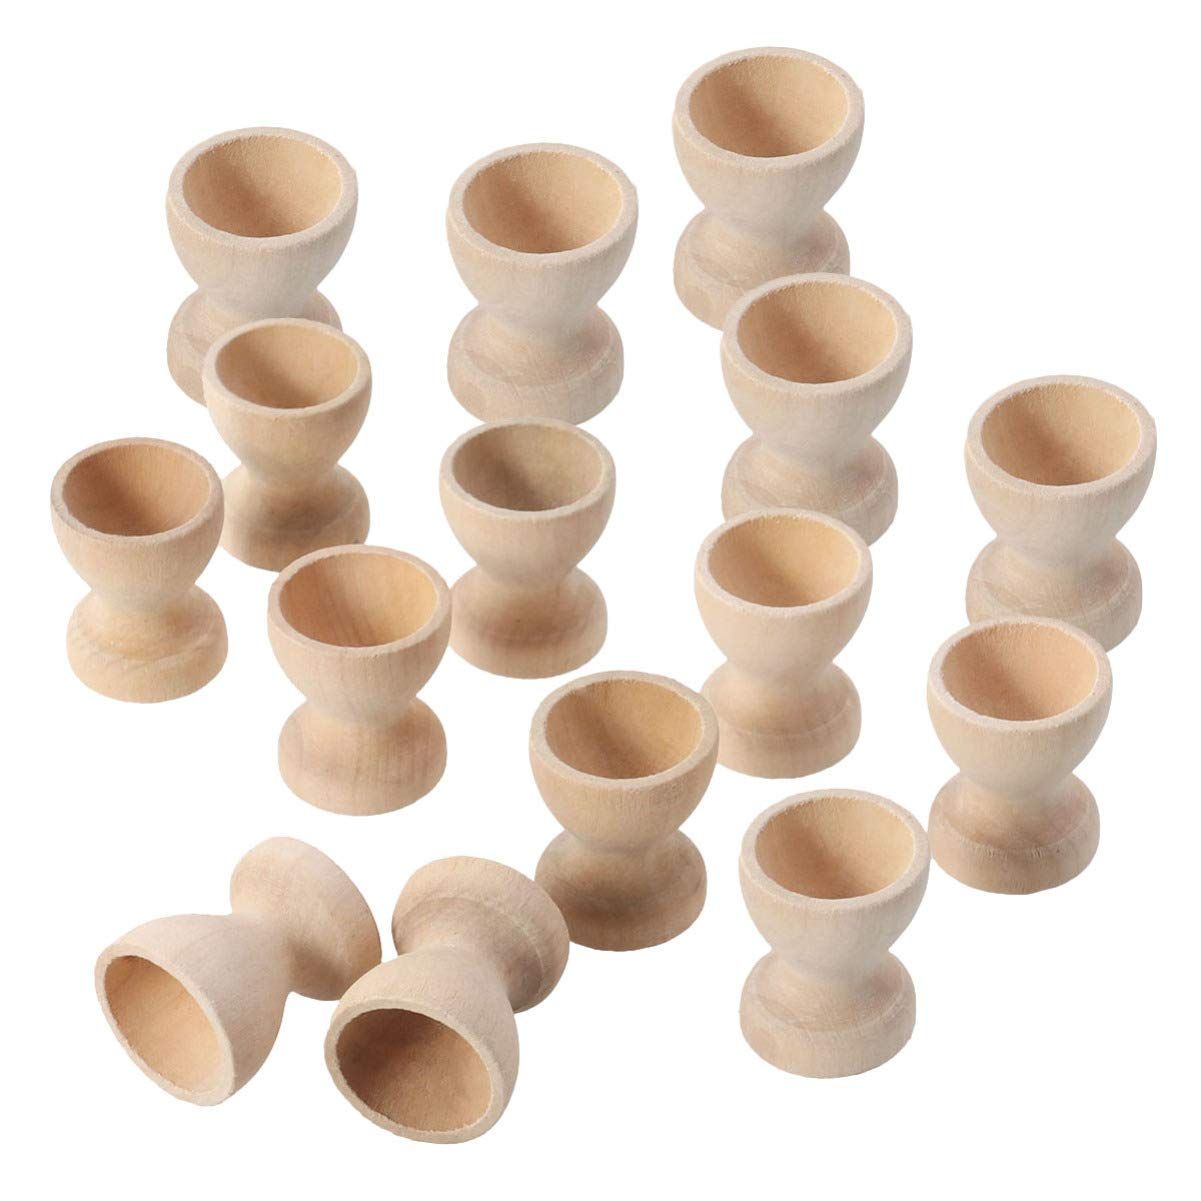 NUOBESTY Wooden Easter Egg Cups 15pcs, 3x3x3.5cm Easter Egg Holder Educational Cup Shape DIY Easter  | Amazon (US)